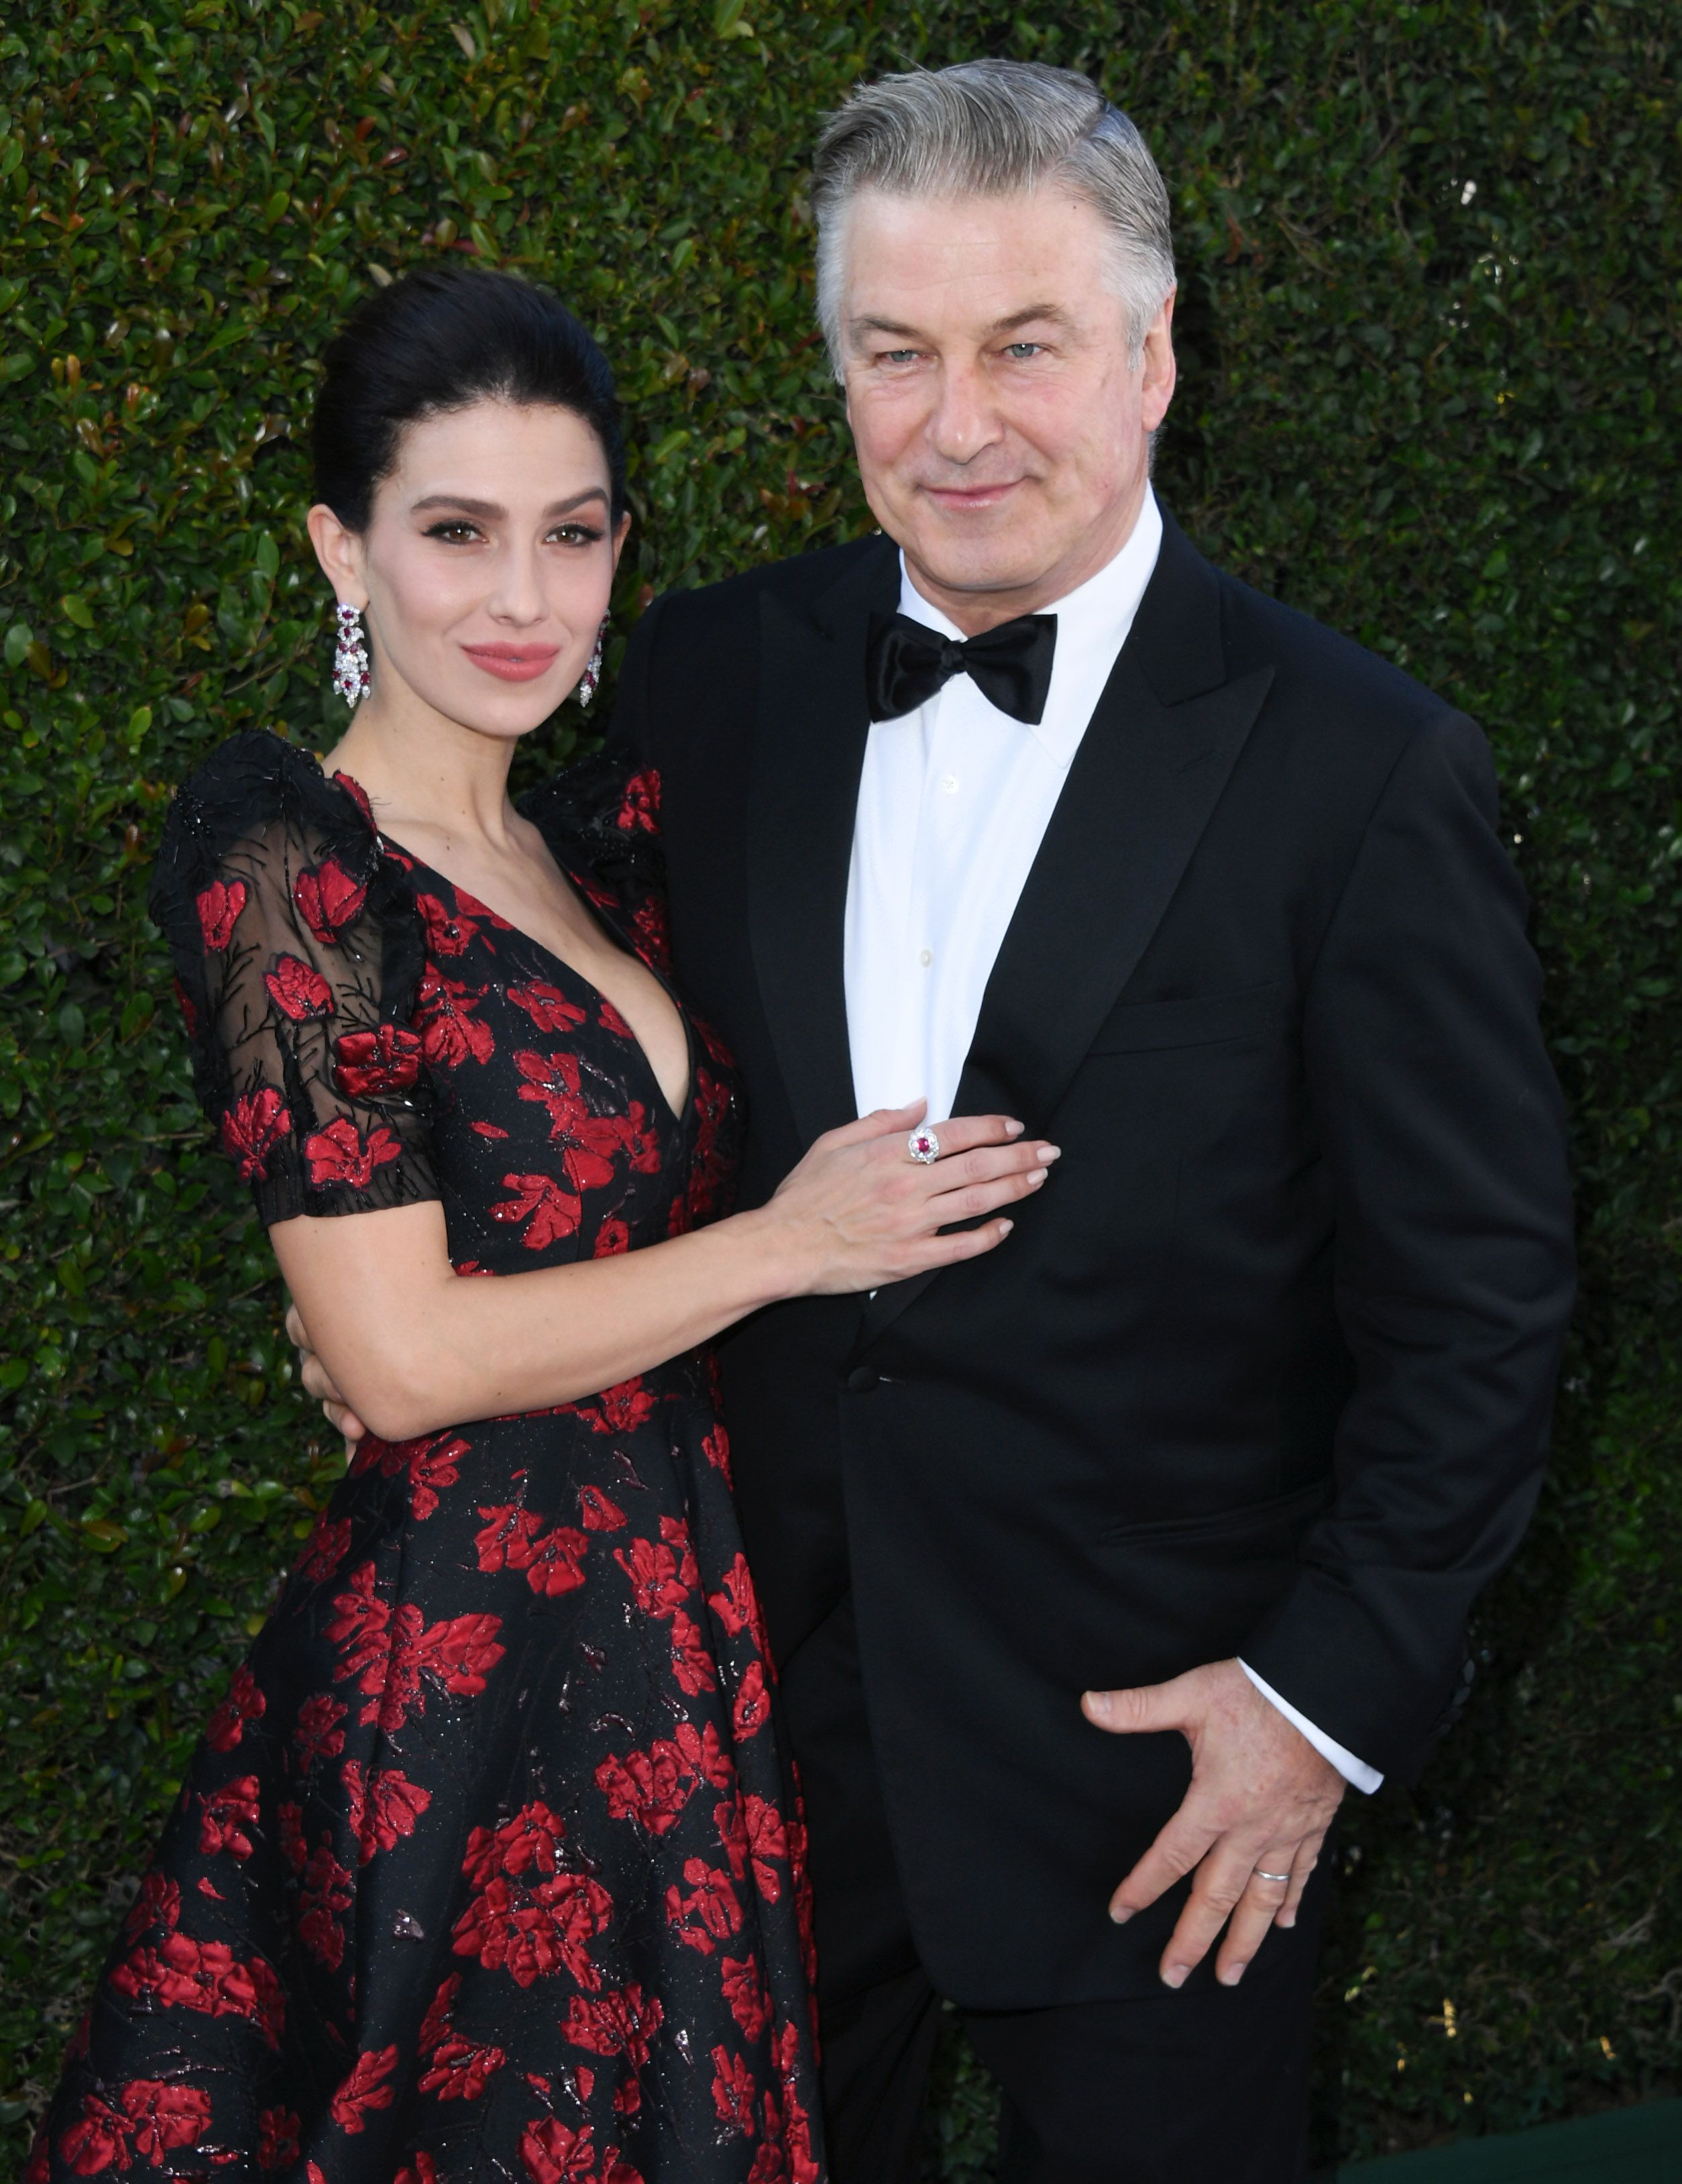 Hilaria Baldwin and Alec Baldwin at 25th Annual Screen Actors Guild Awards at The Shrine Auditorium on January 27, 2019 | Photo: Getty Images